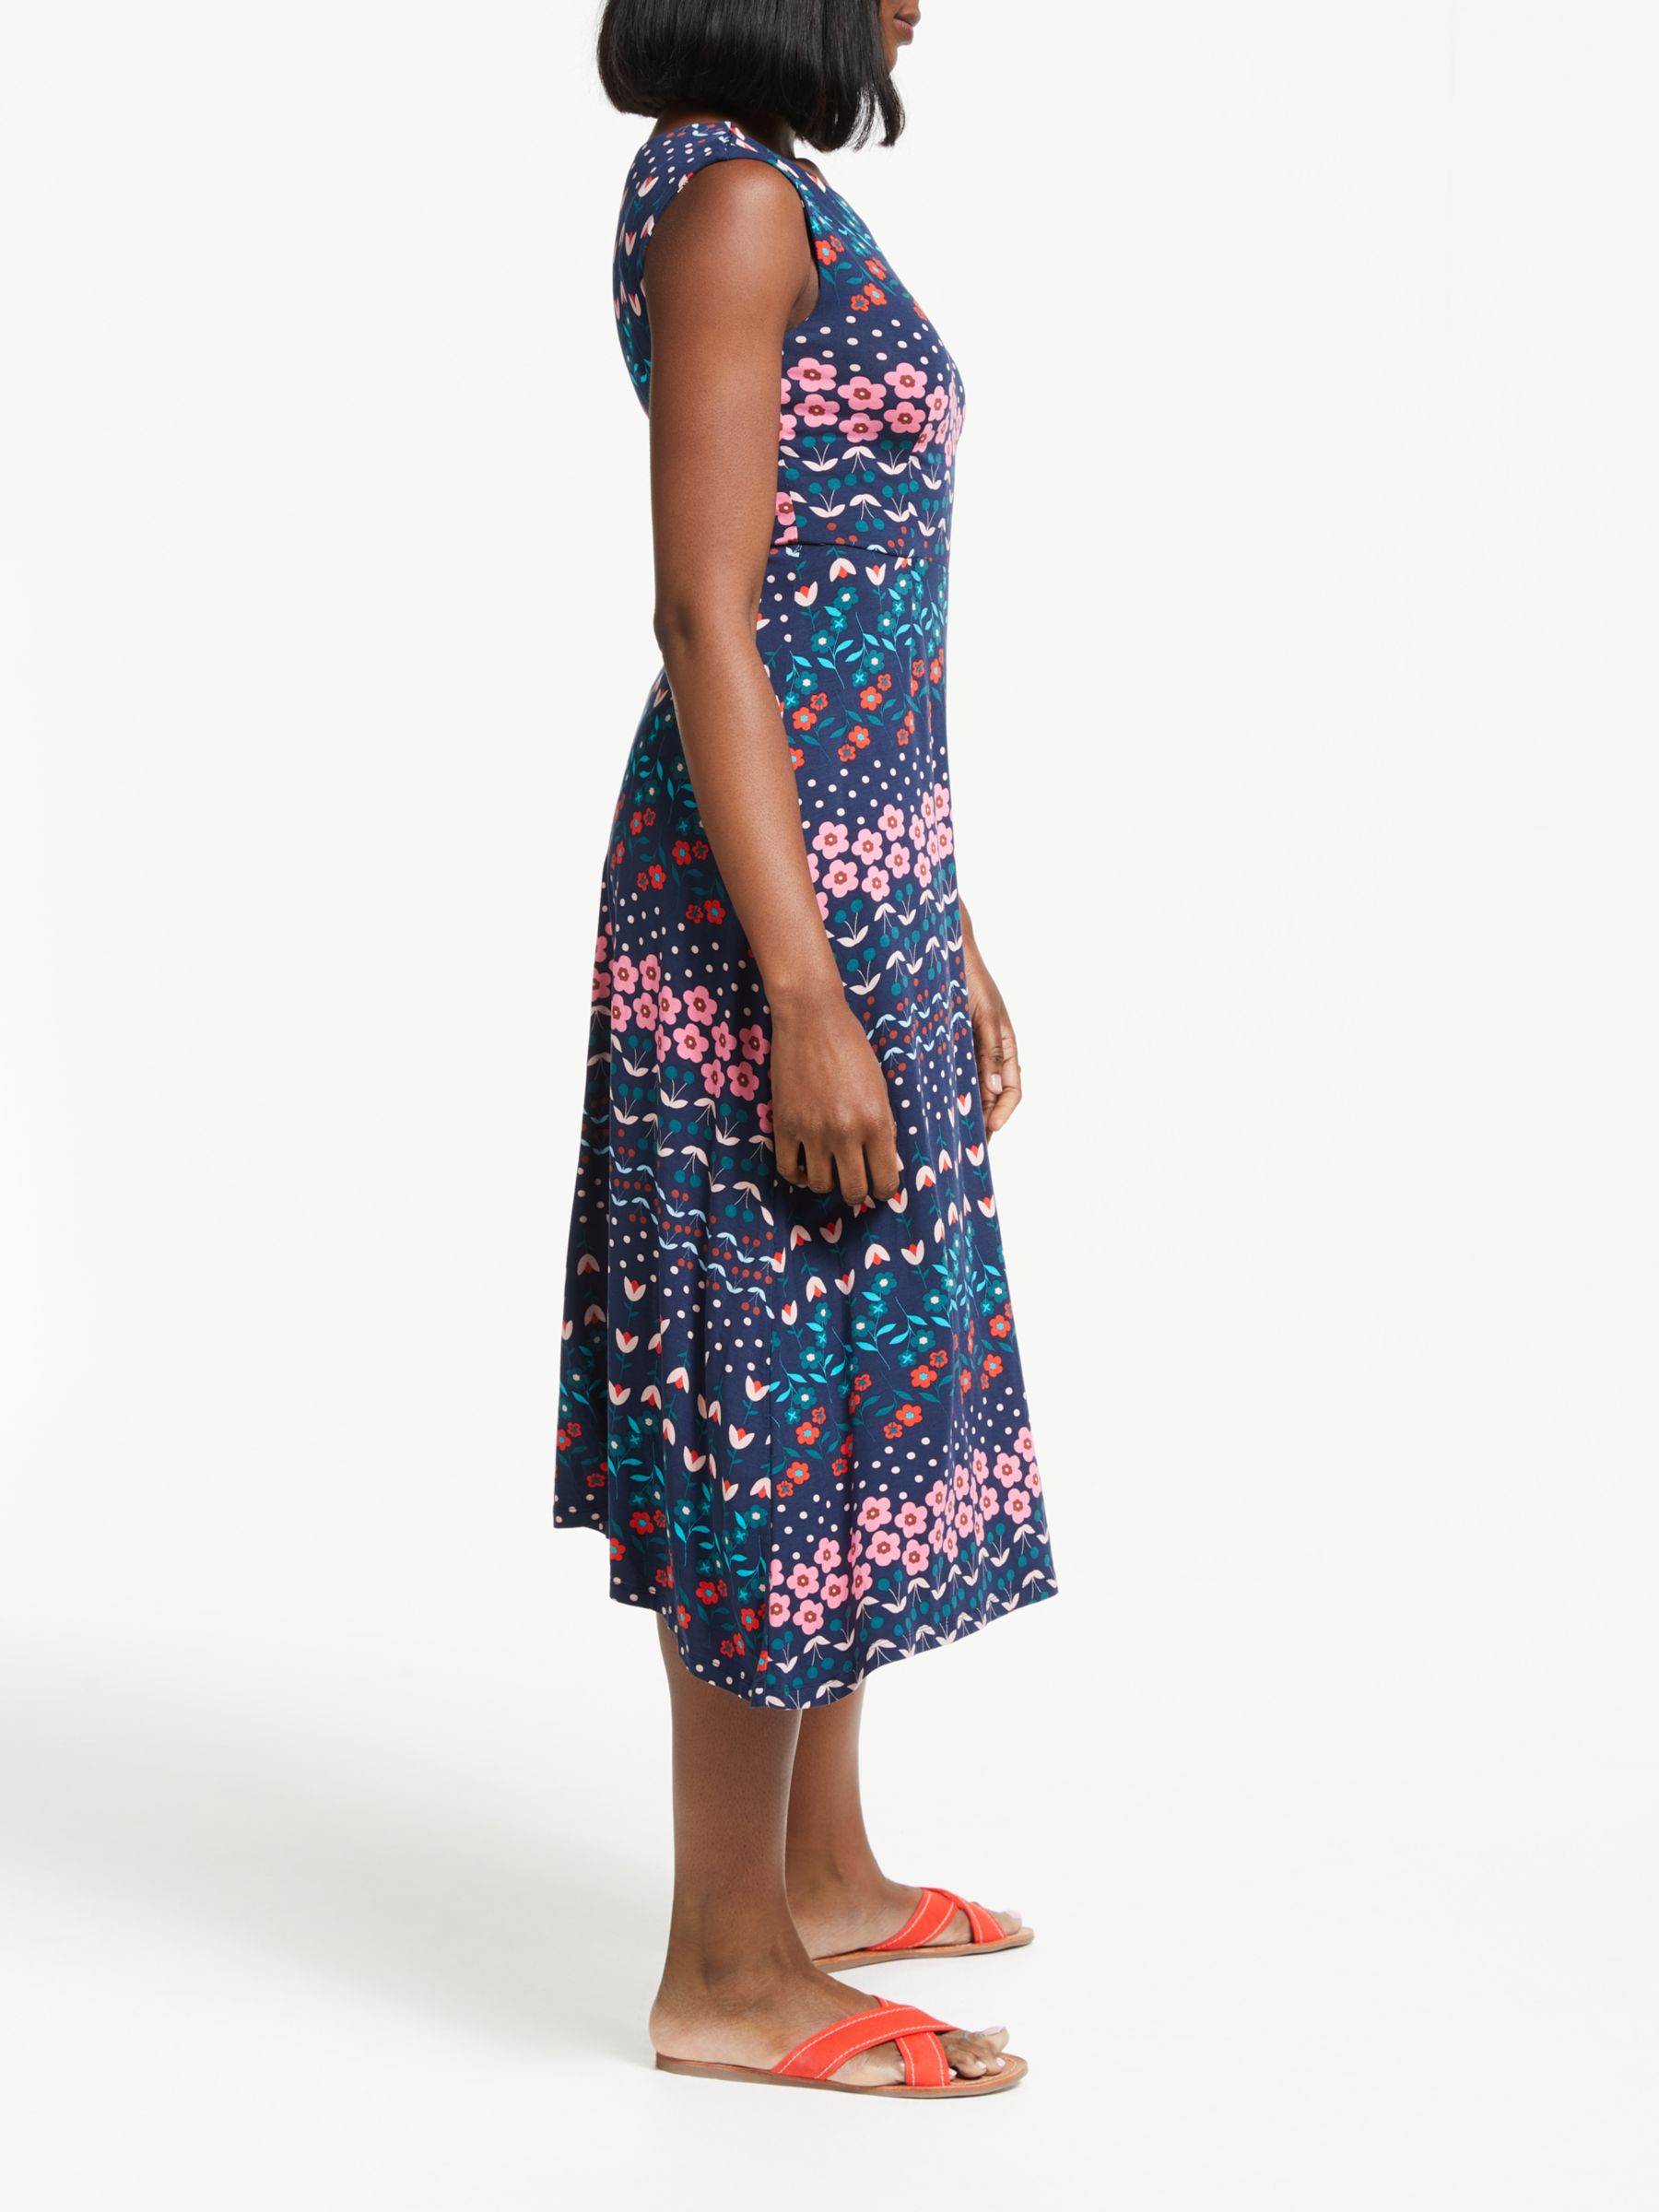 Boden Polly Dress, Navy Floral Field at 